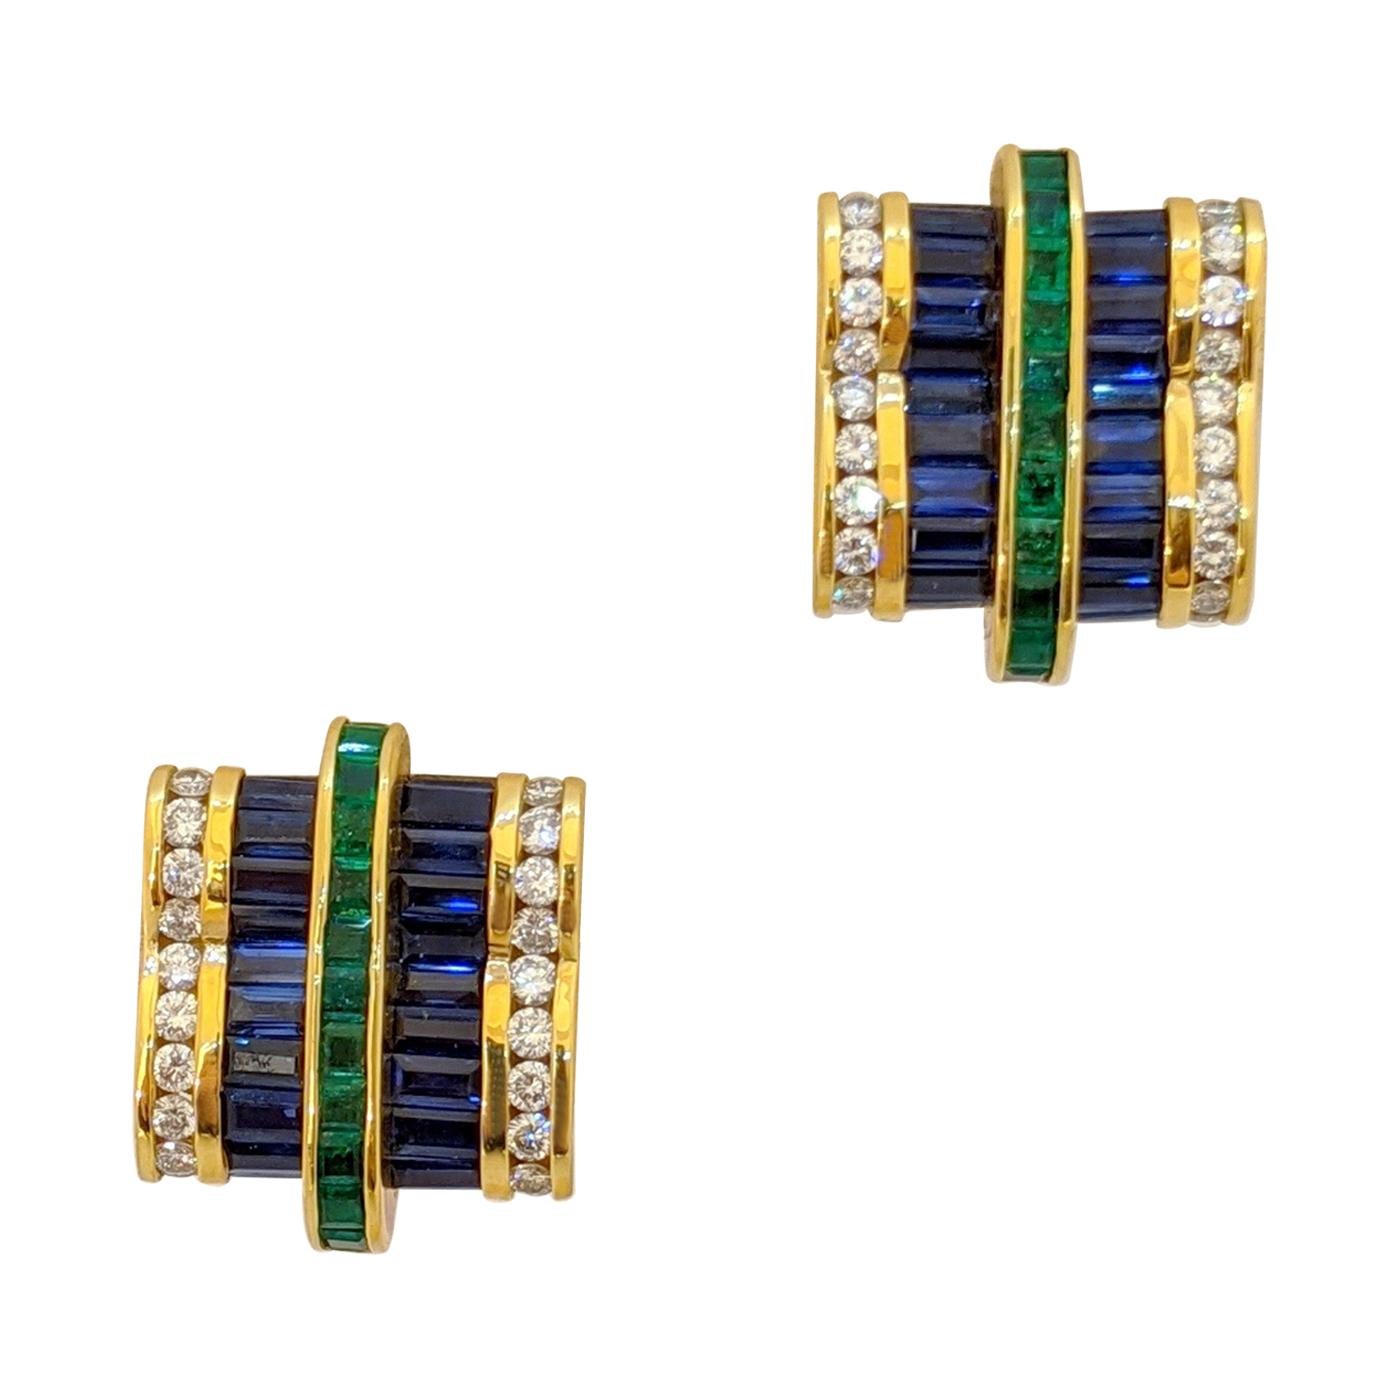 Charles Krypell 18Kt YG Invisibly Set Diamond, Blue Sapphire & Emerald Earrings